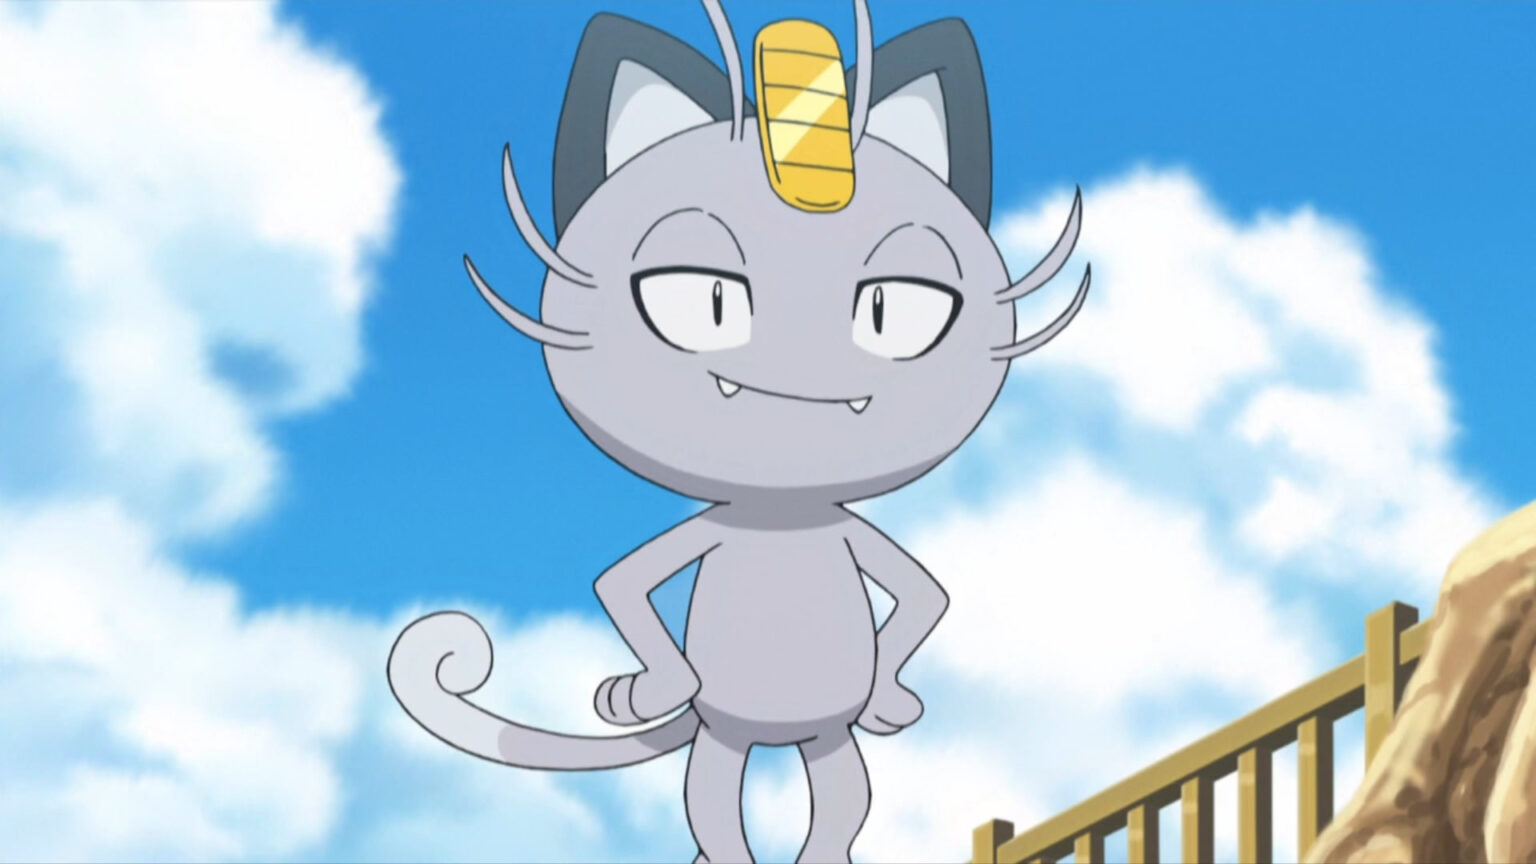 If you gotta catch em all, you should know about these cool cats and kittens from 'Pokémon'. See our picks for the cutest kitties this side of the Pokédex.